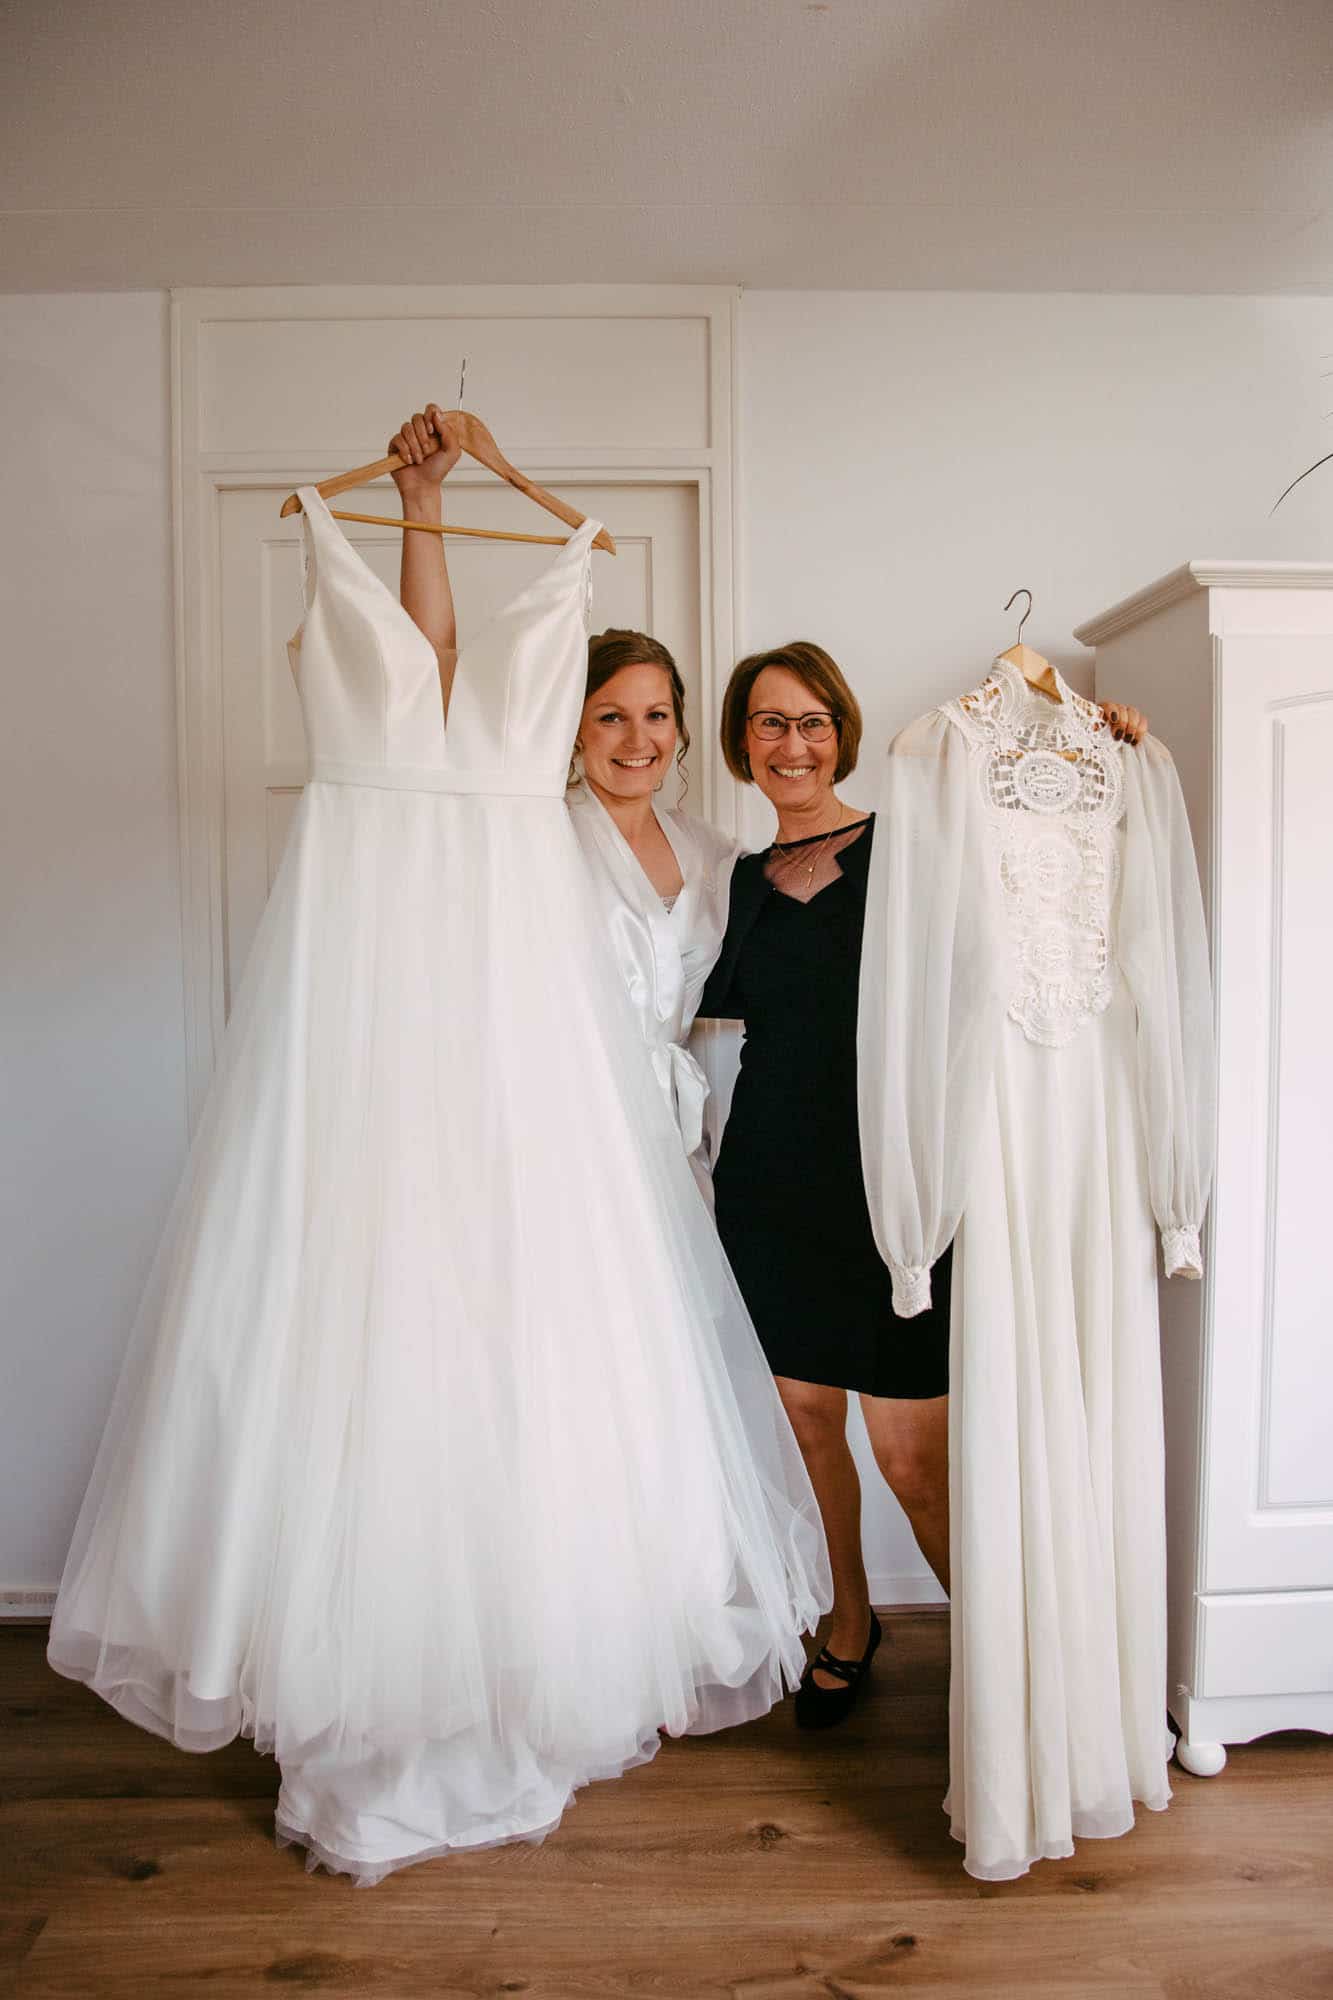 Two brides pose with their wedding dresses.